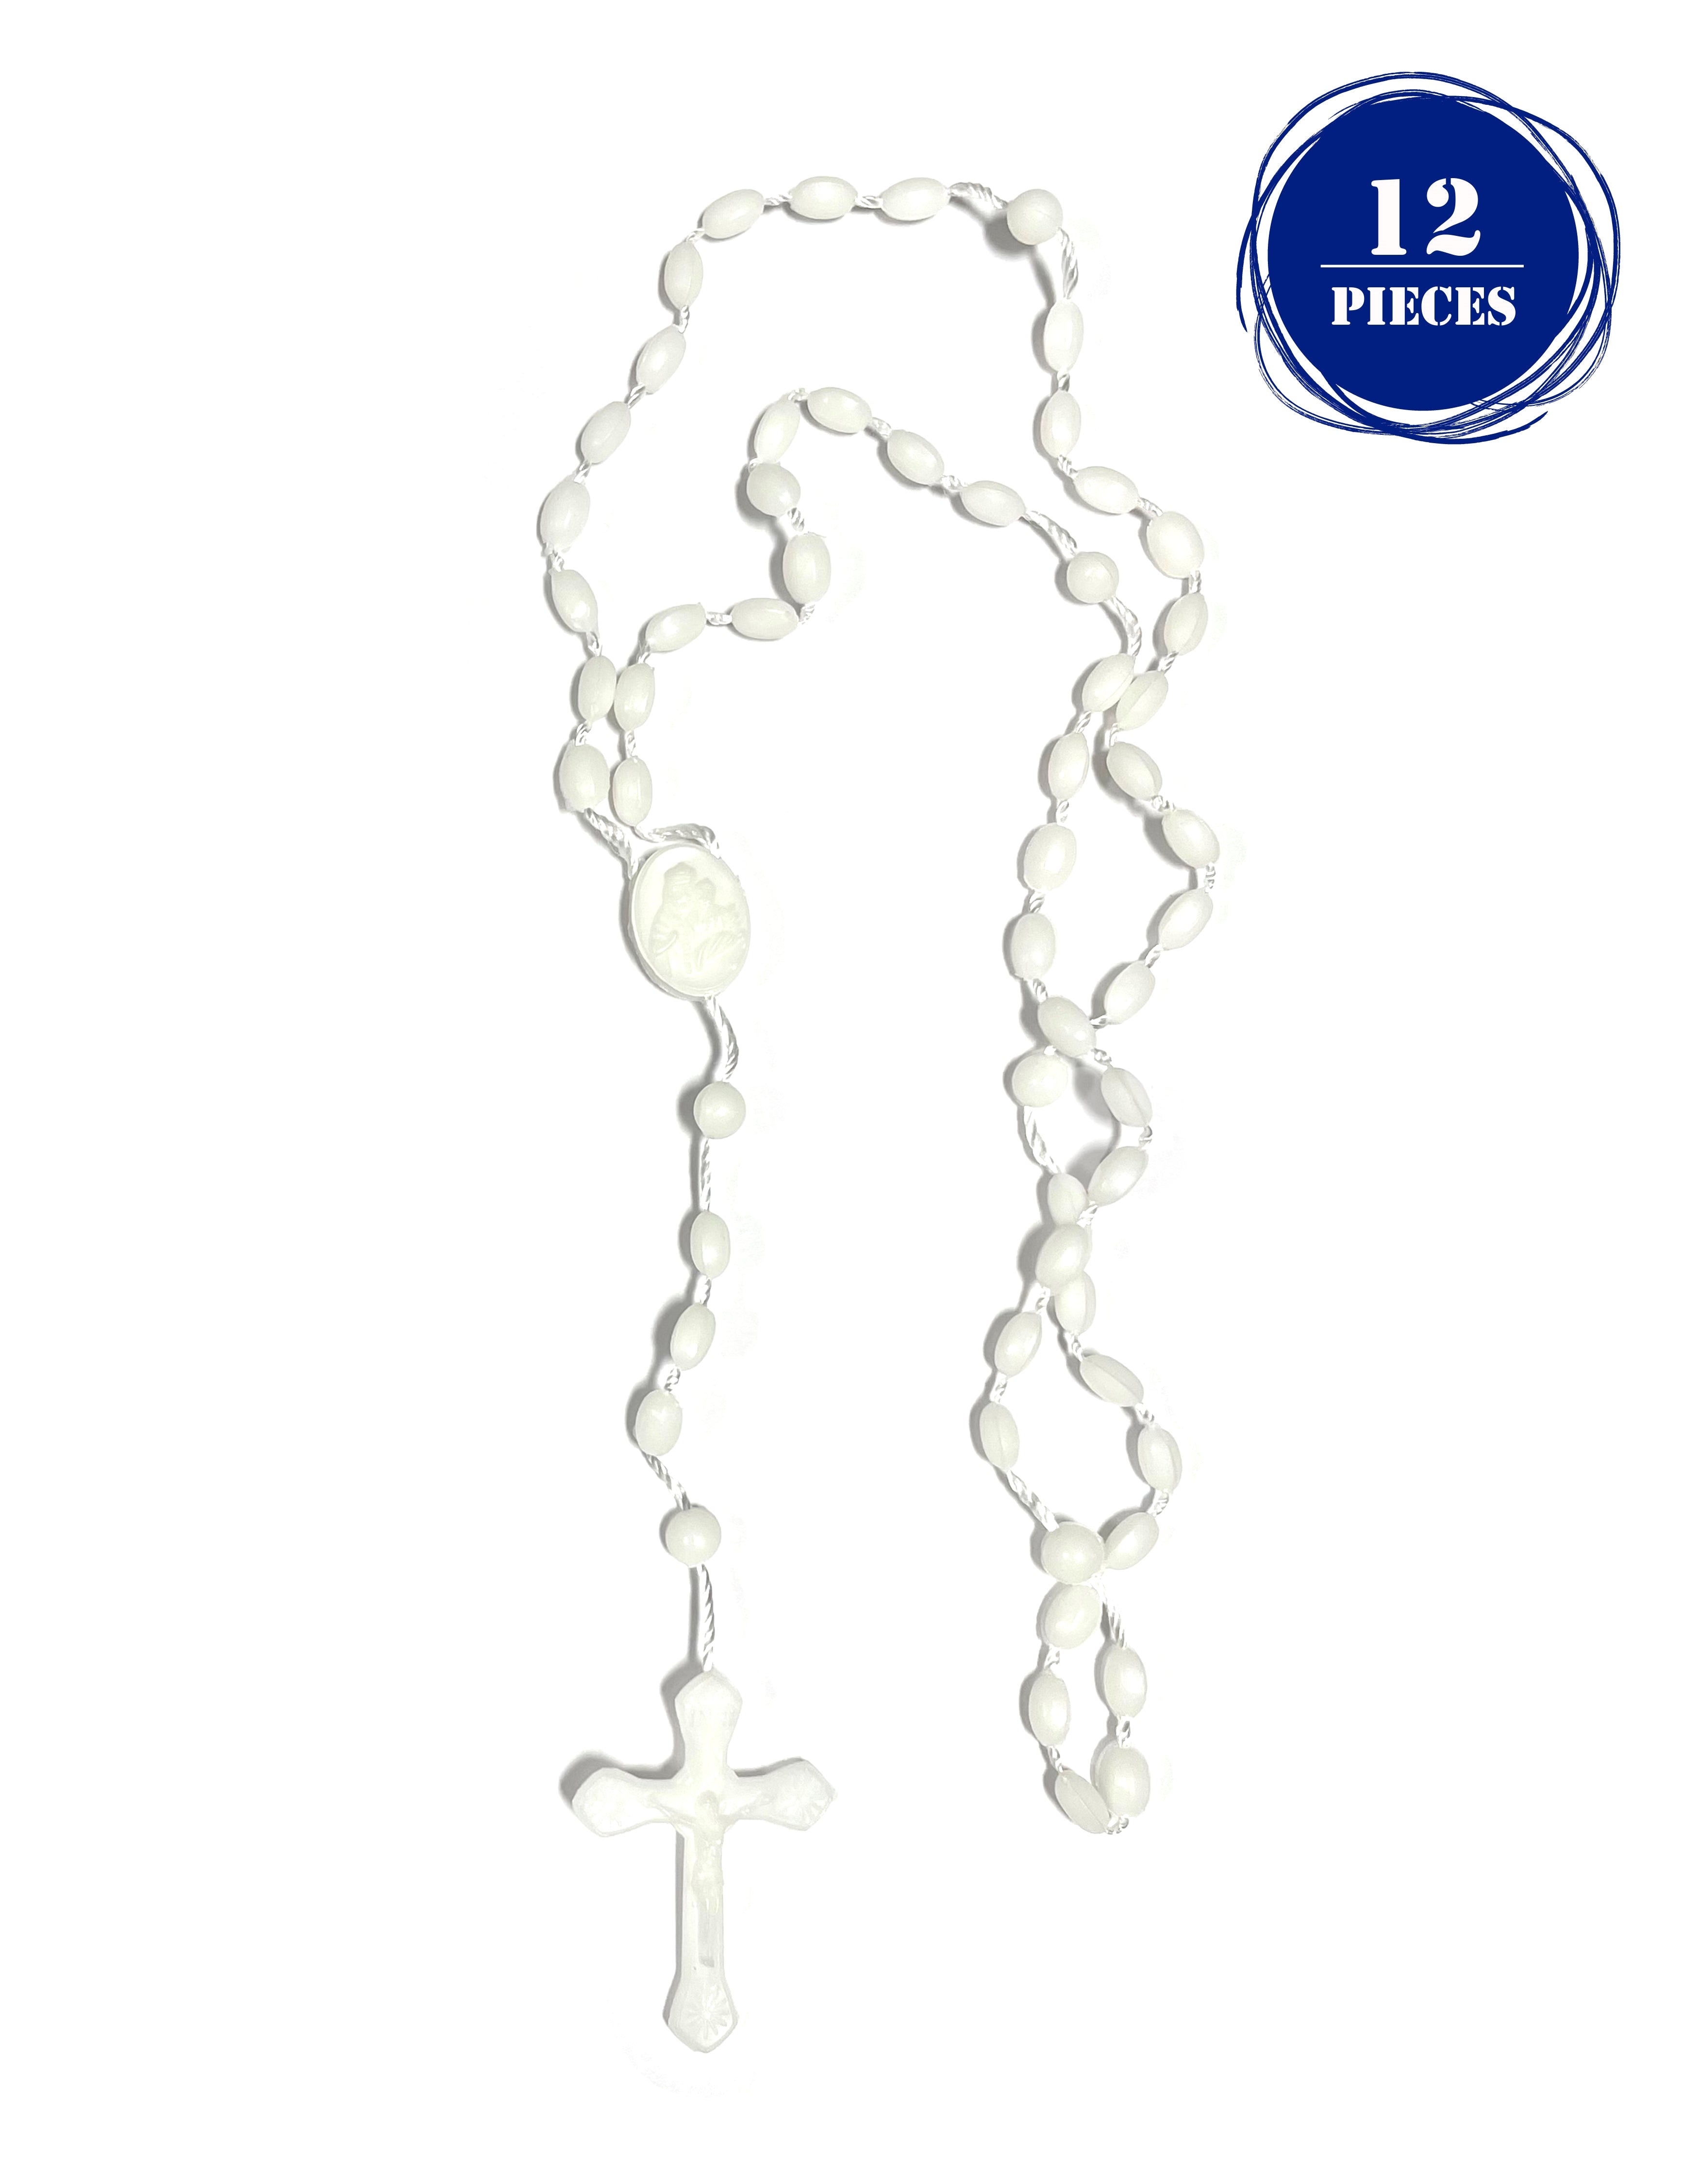 Plastic beads and cord rosary - 12 Pieces